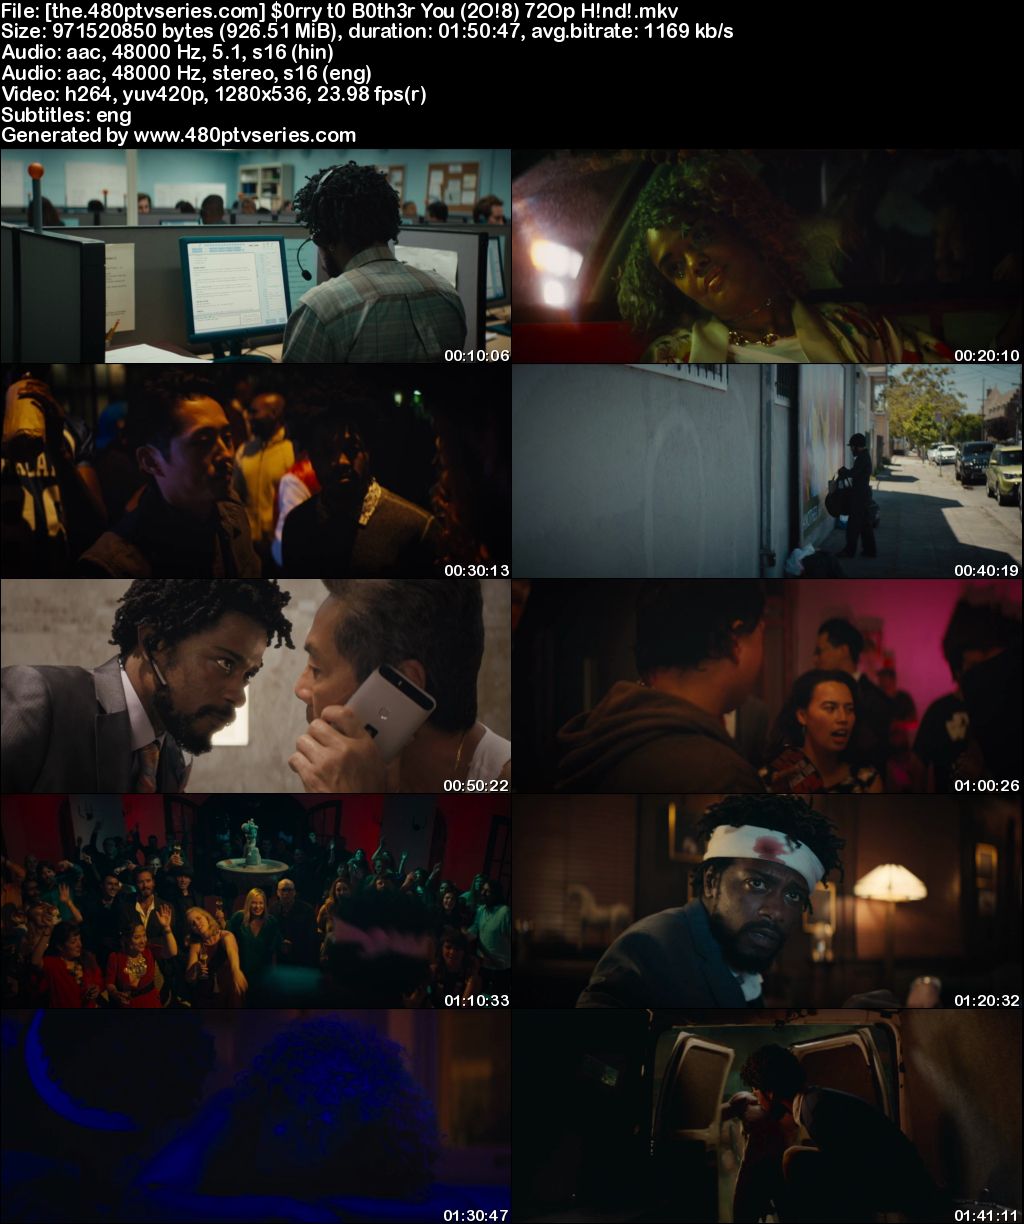 Watch Online Free Sorry to Bother You (2018) Full Hindi Dual Audio Movie Download 480p 720p Bluray